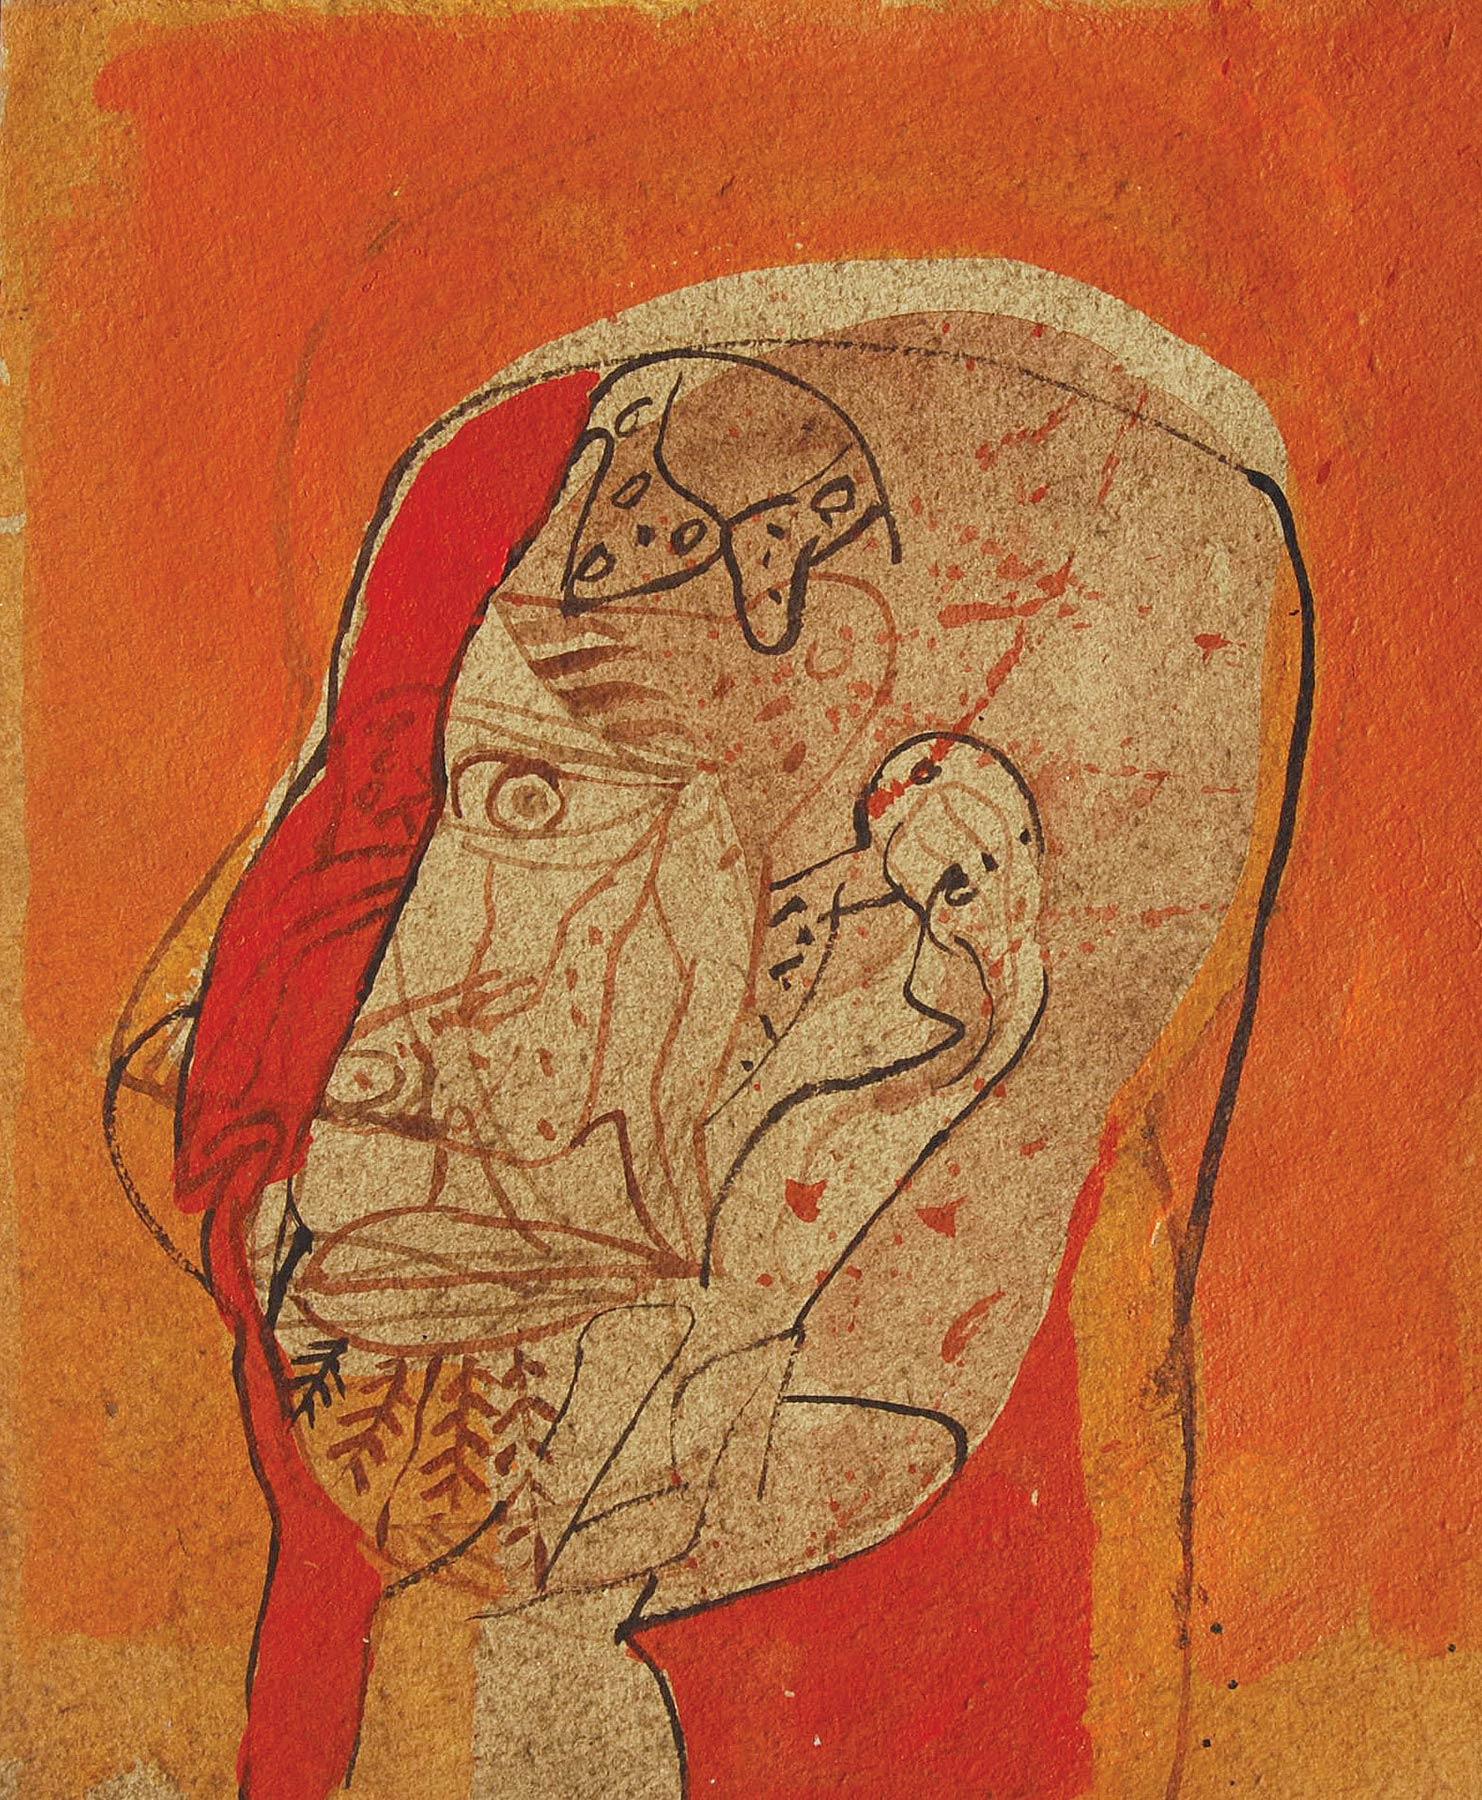 Sunil Das - Head III - 13 x 11 inches (unframed size)
Mixed Media on Board
Inclusive of shipment in ready to hang form.

Sunil Das (1939-2015) was a Master Modern Indian Artist from Bengal. Extremely successful right from his college days, Sunil Das